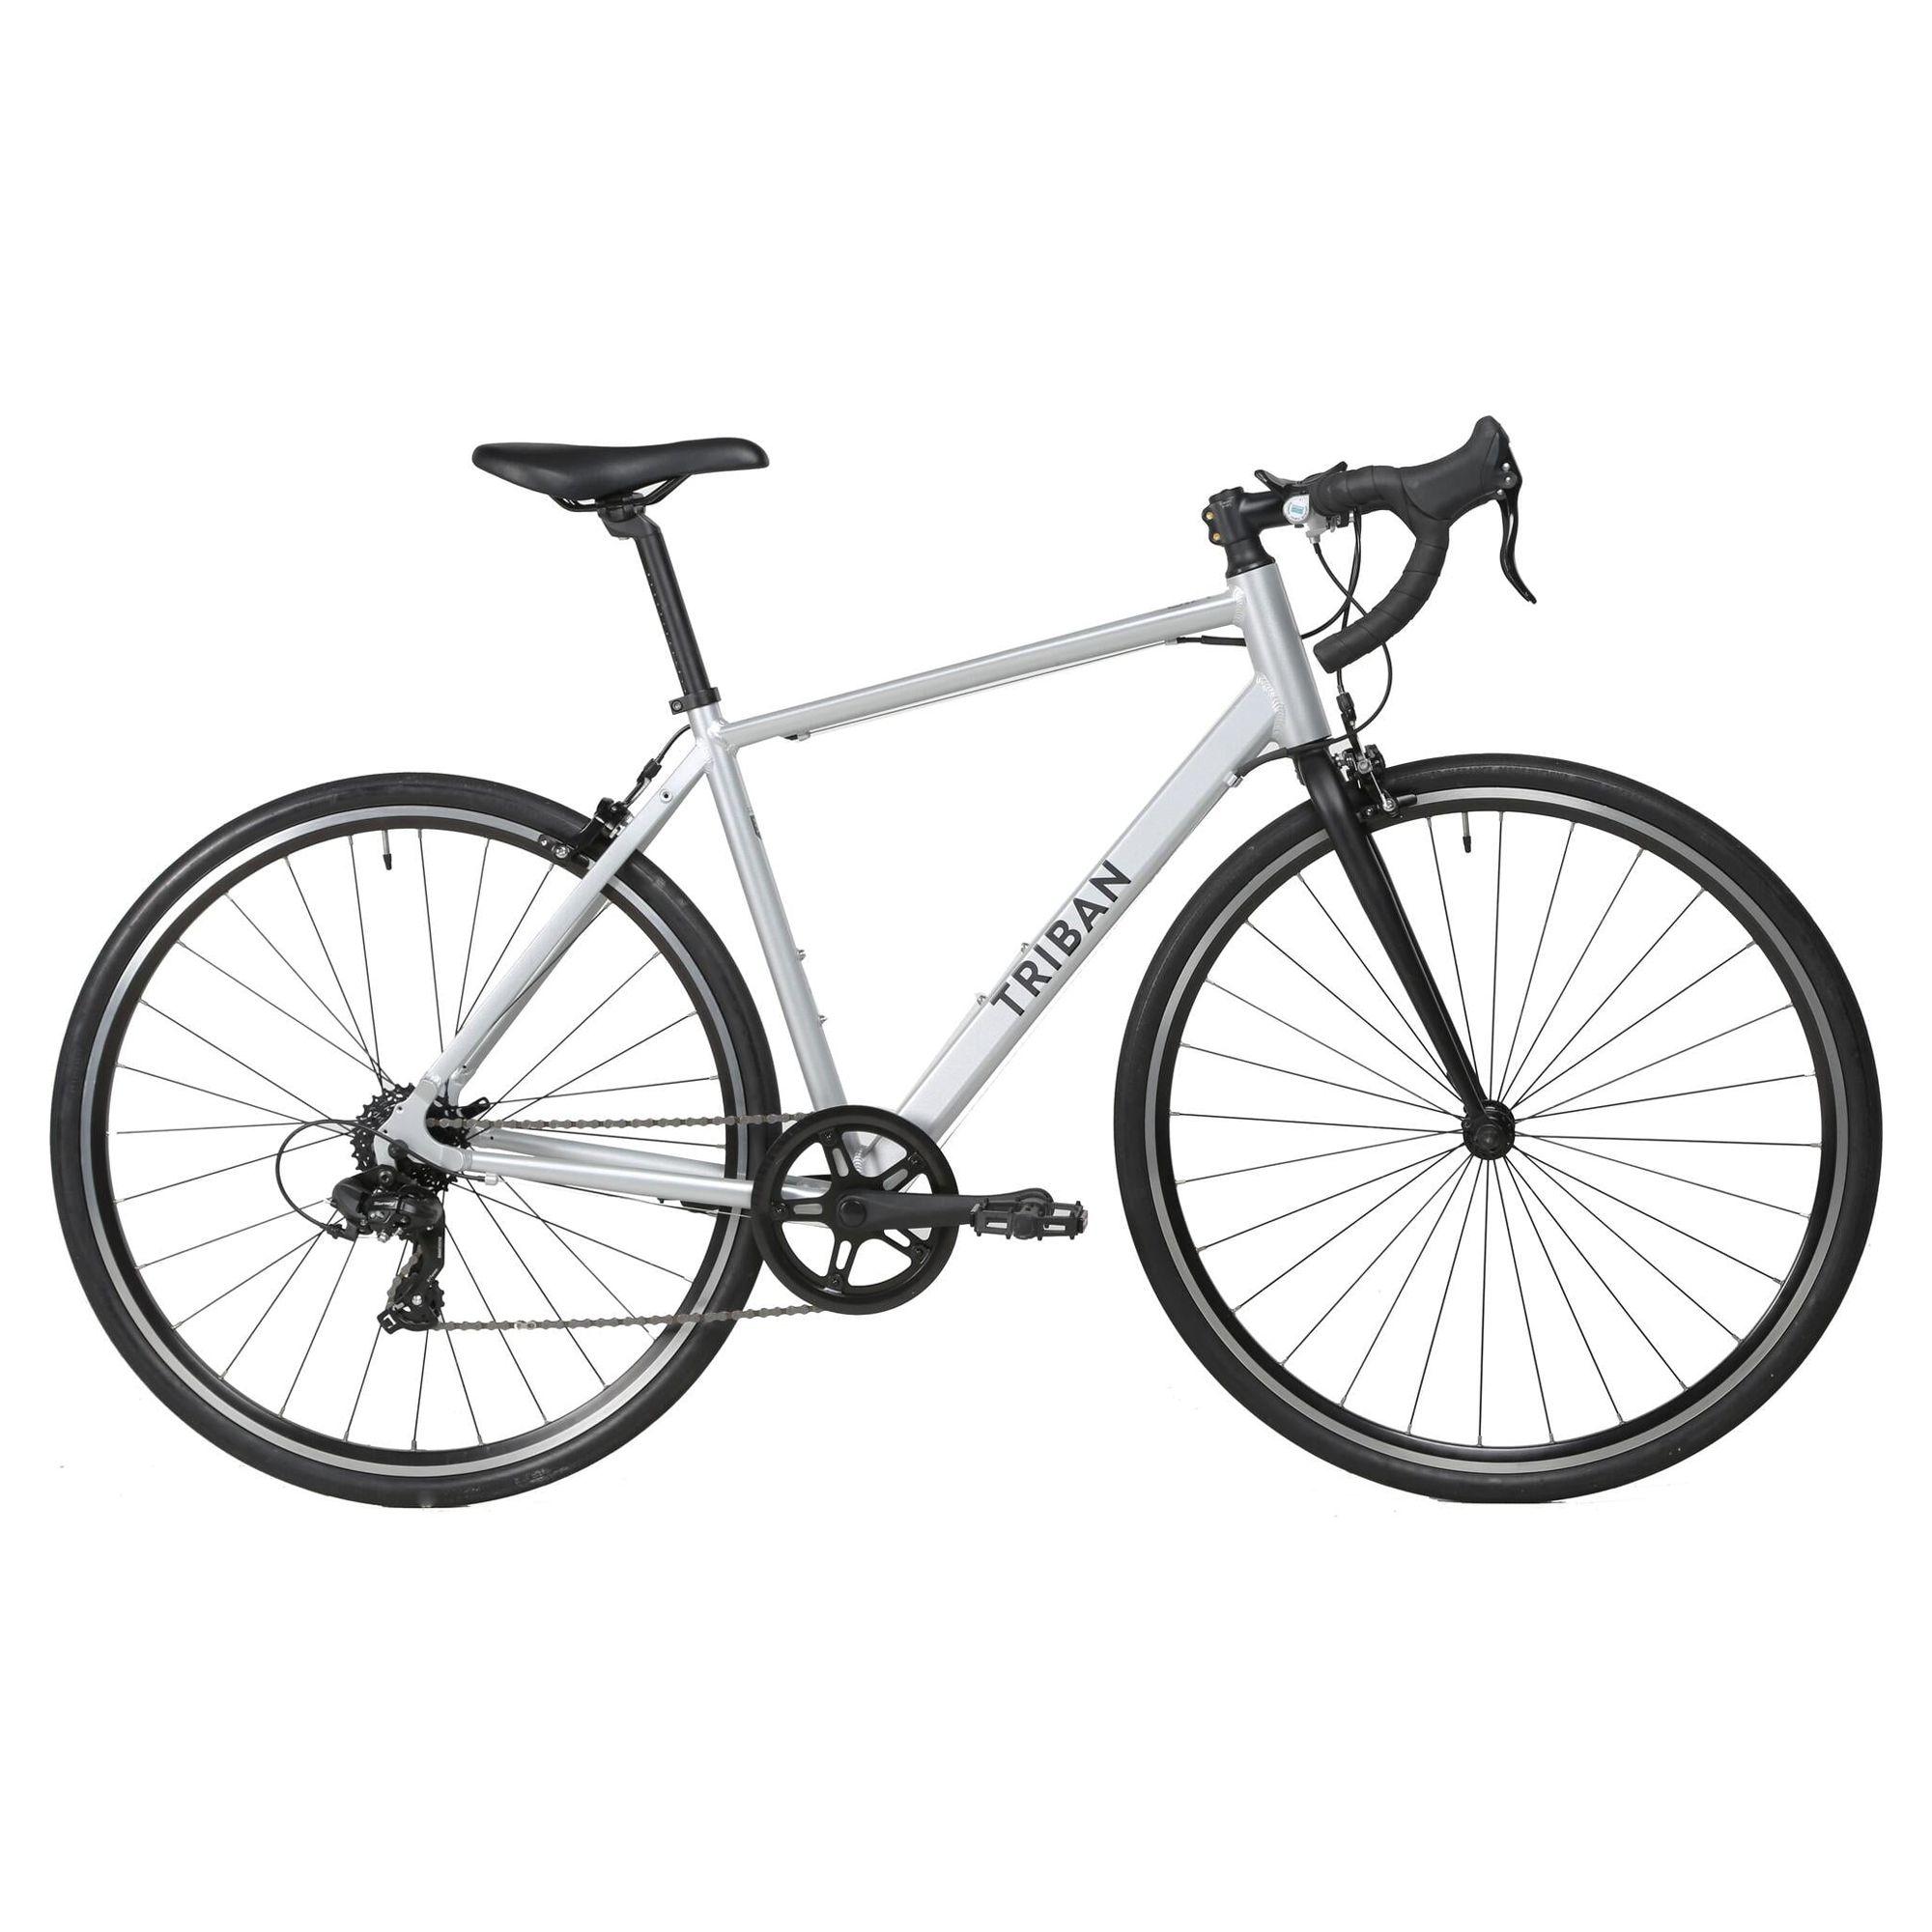 Decathlon Triban Abyss RC100, Aluminum Road Bike, 700c, 7 Speed, Silver, Small - image 1 of 6